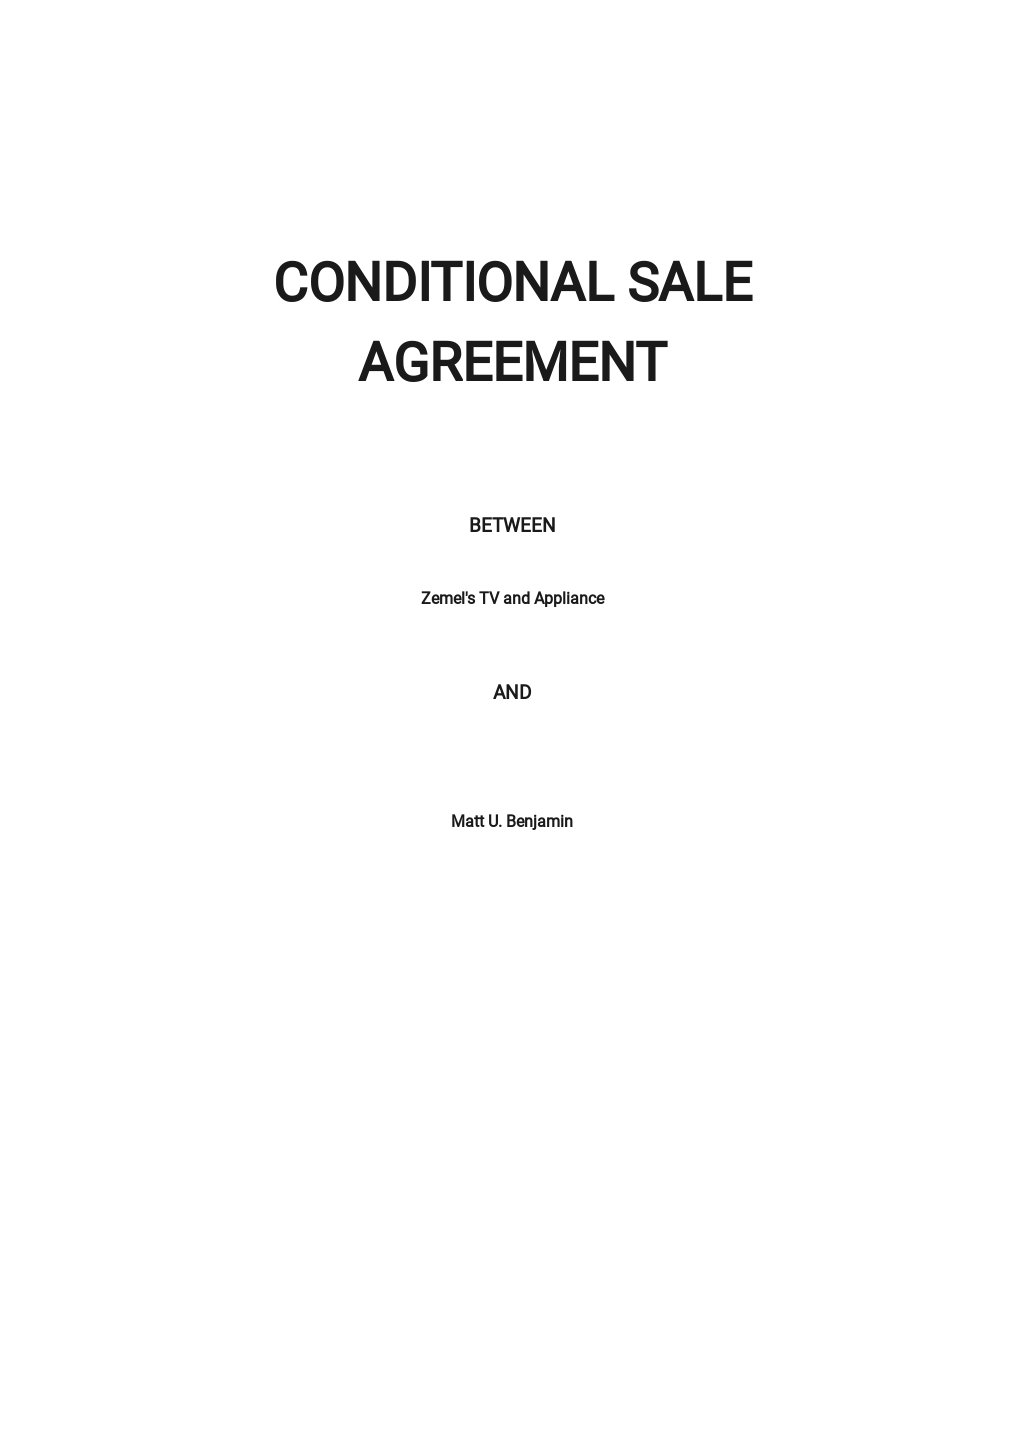 Conditional Sale Agreement Template.jpe